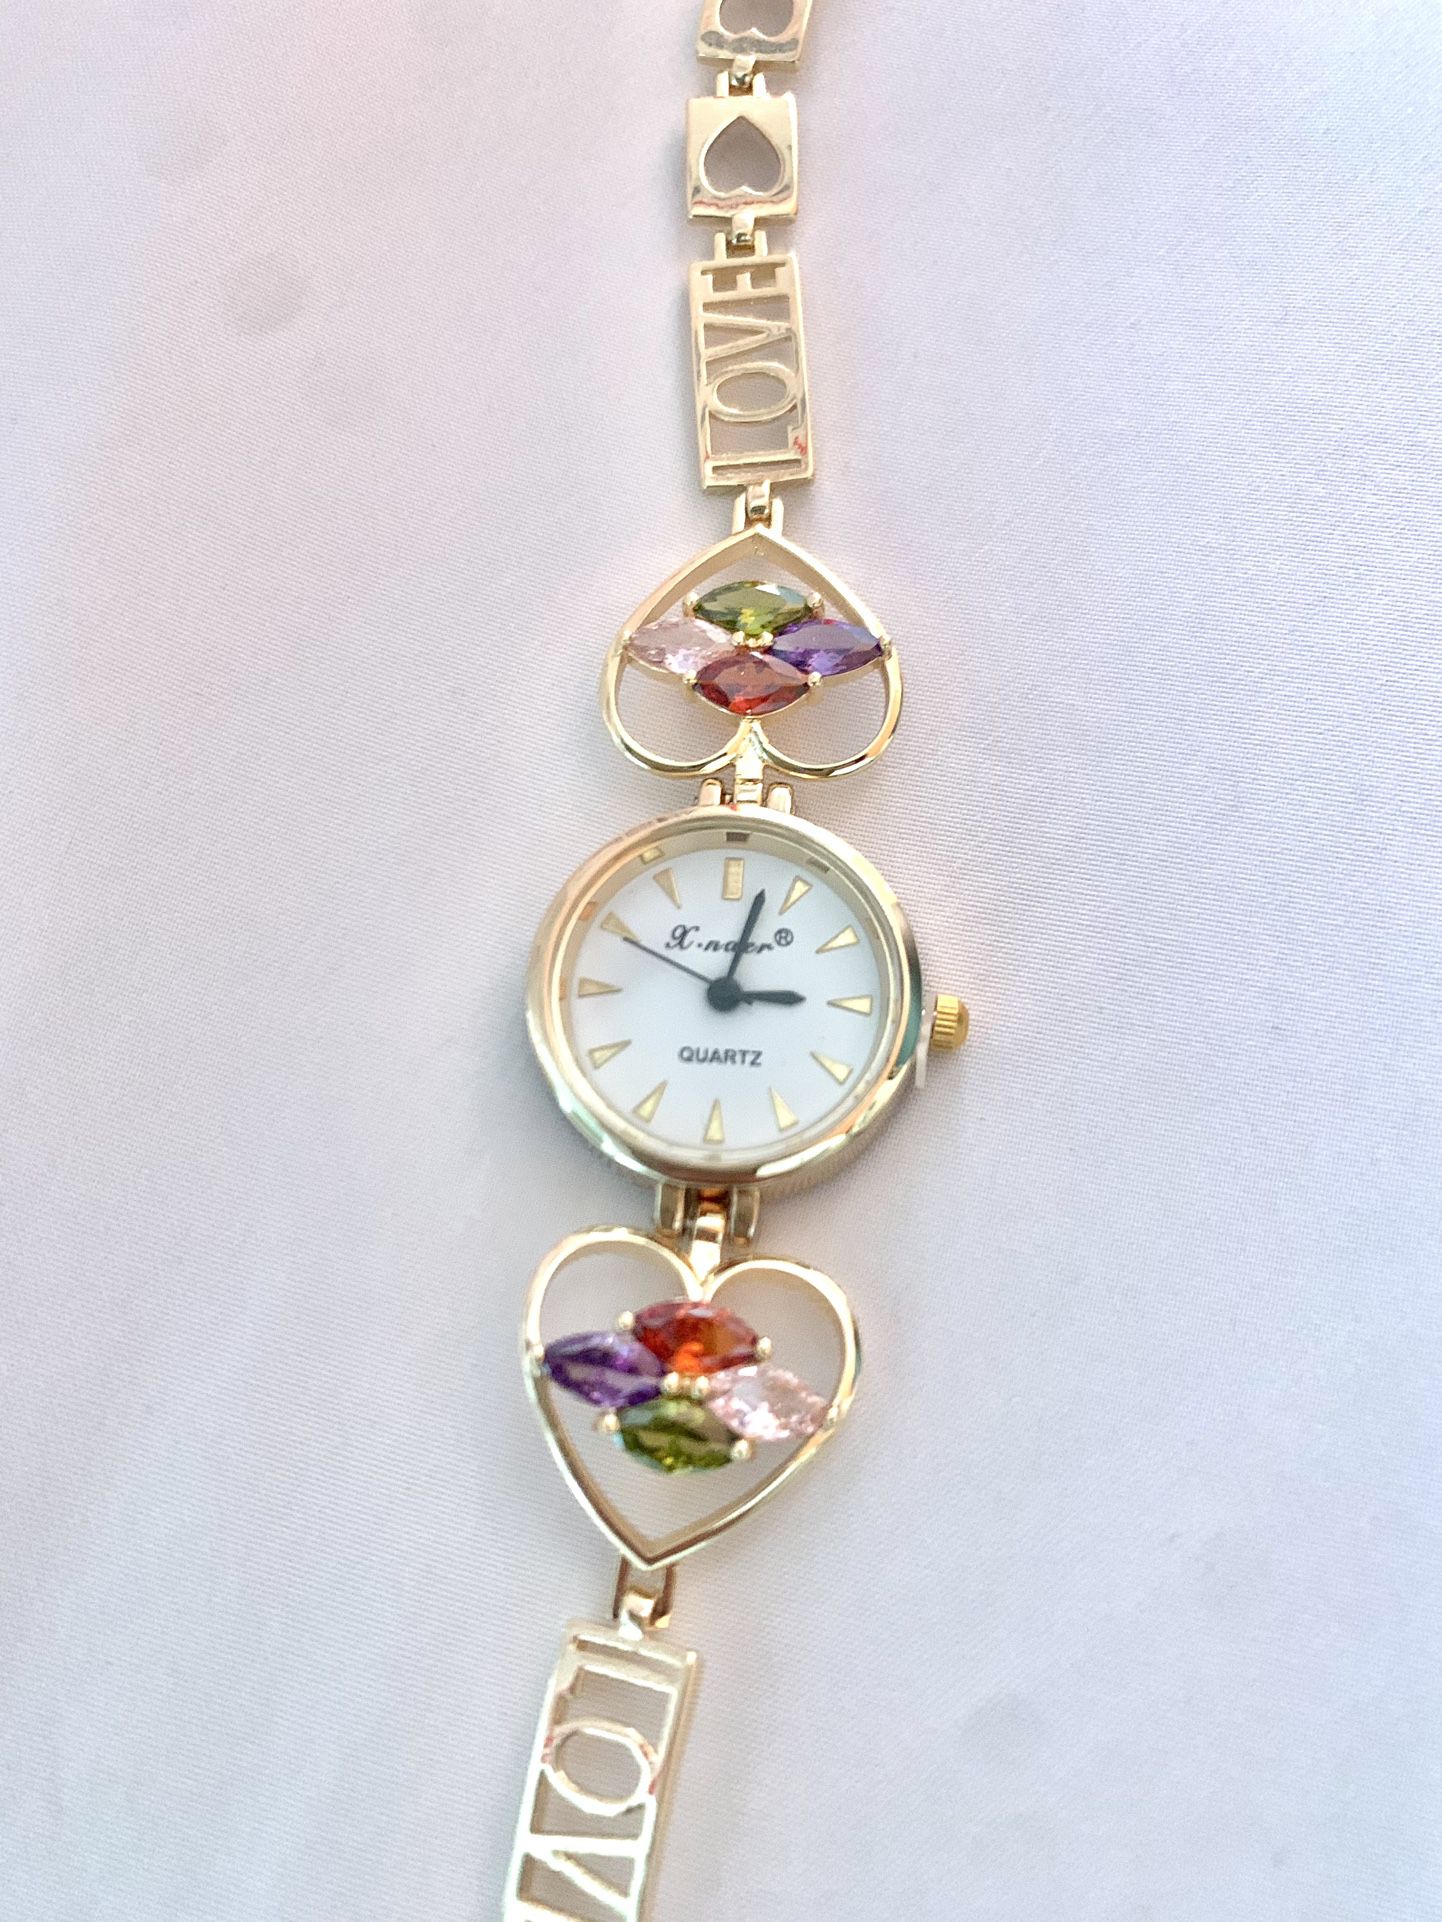 Women's Watch With colored Stones